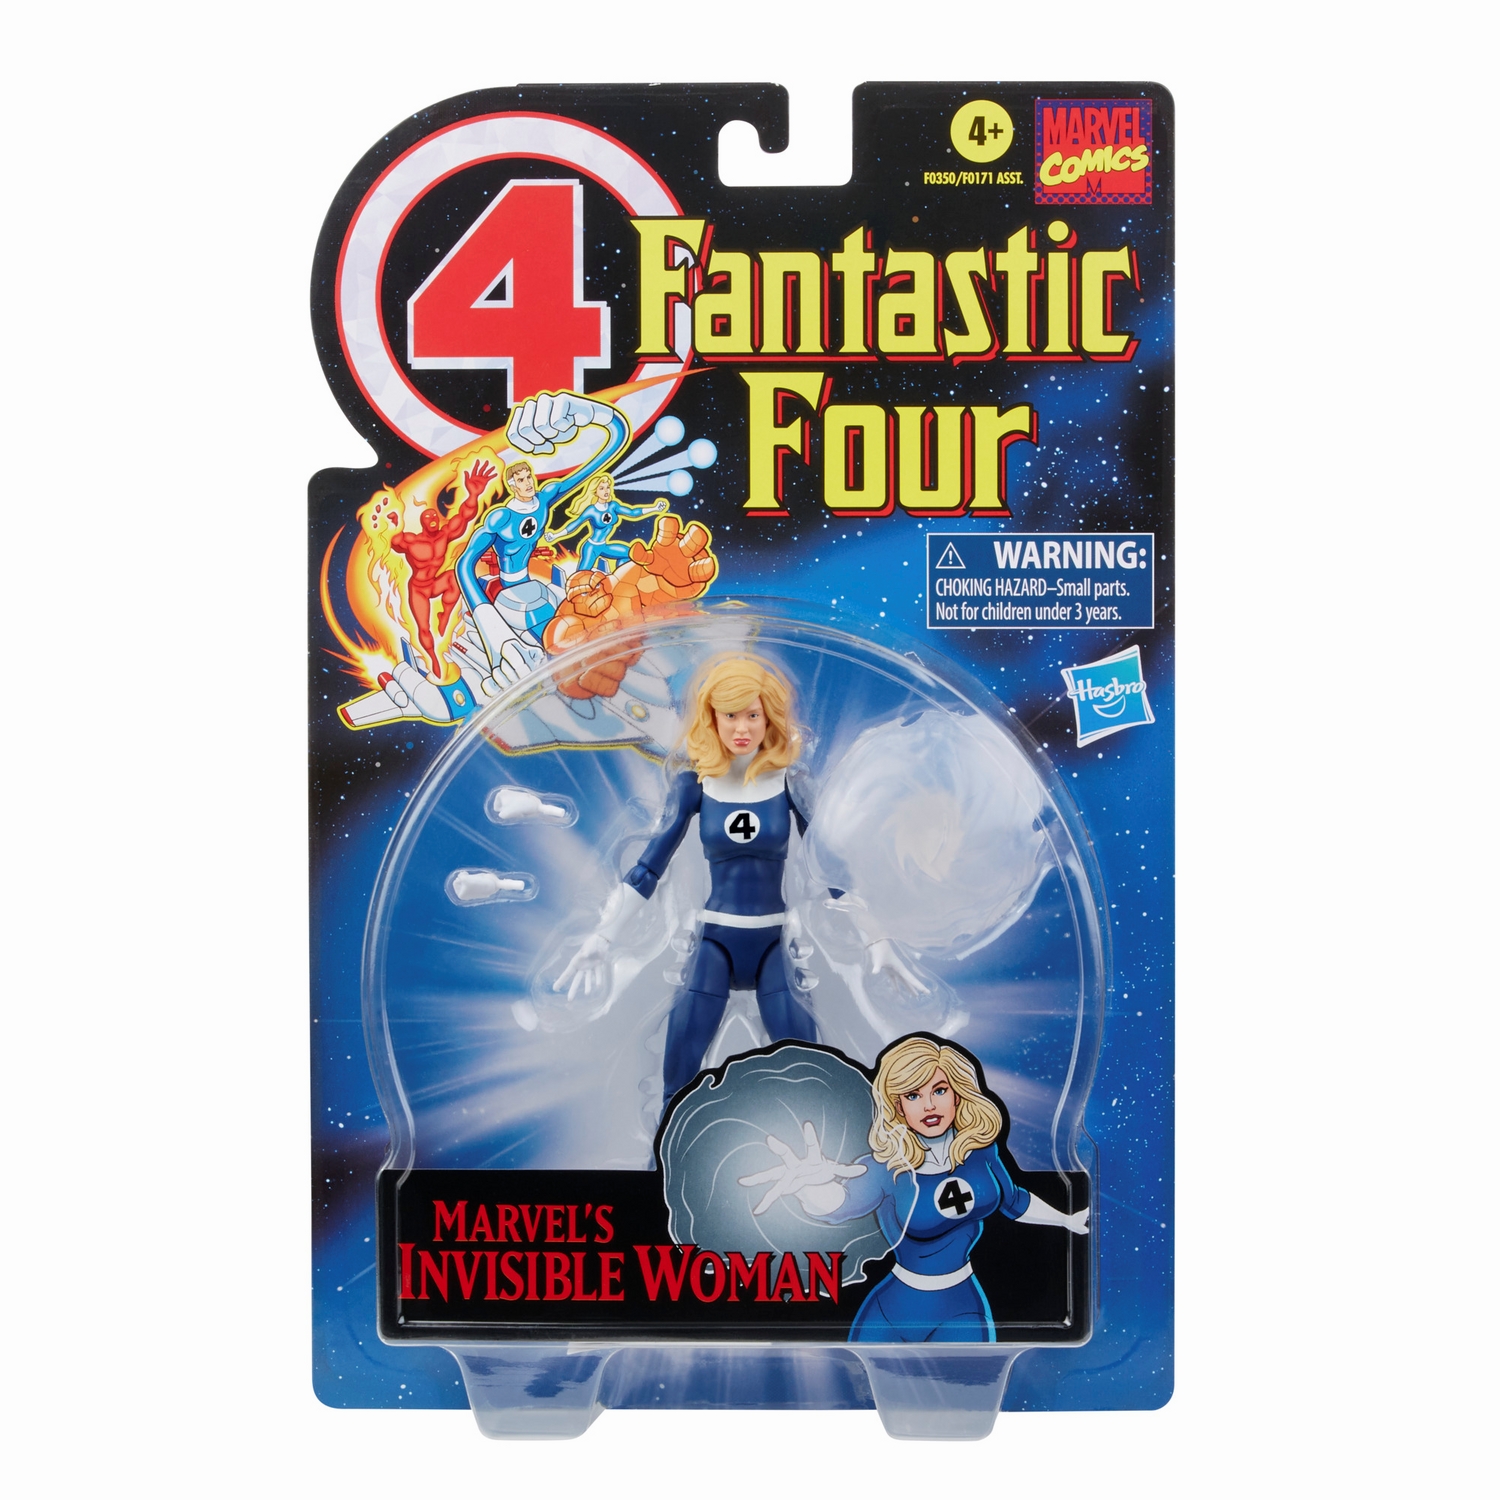 MARVEL LEGENDS SERIES 6-INCH RETRO FANTASTIC FOUR MARVEL'S INVISIBLE WOMAN Figure_in pck 1.jpg